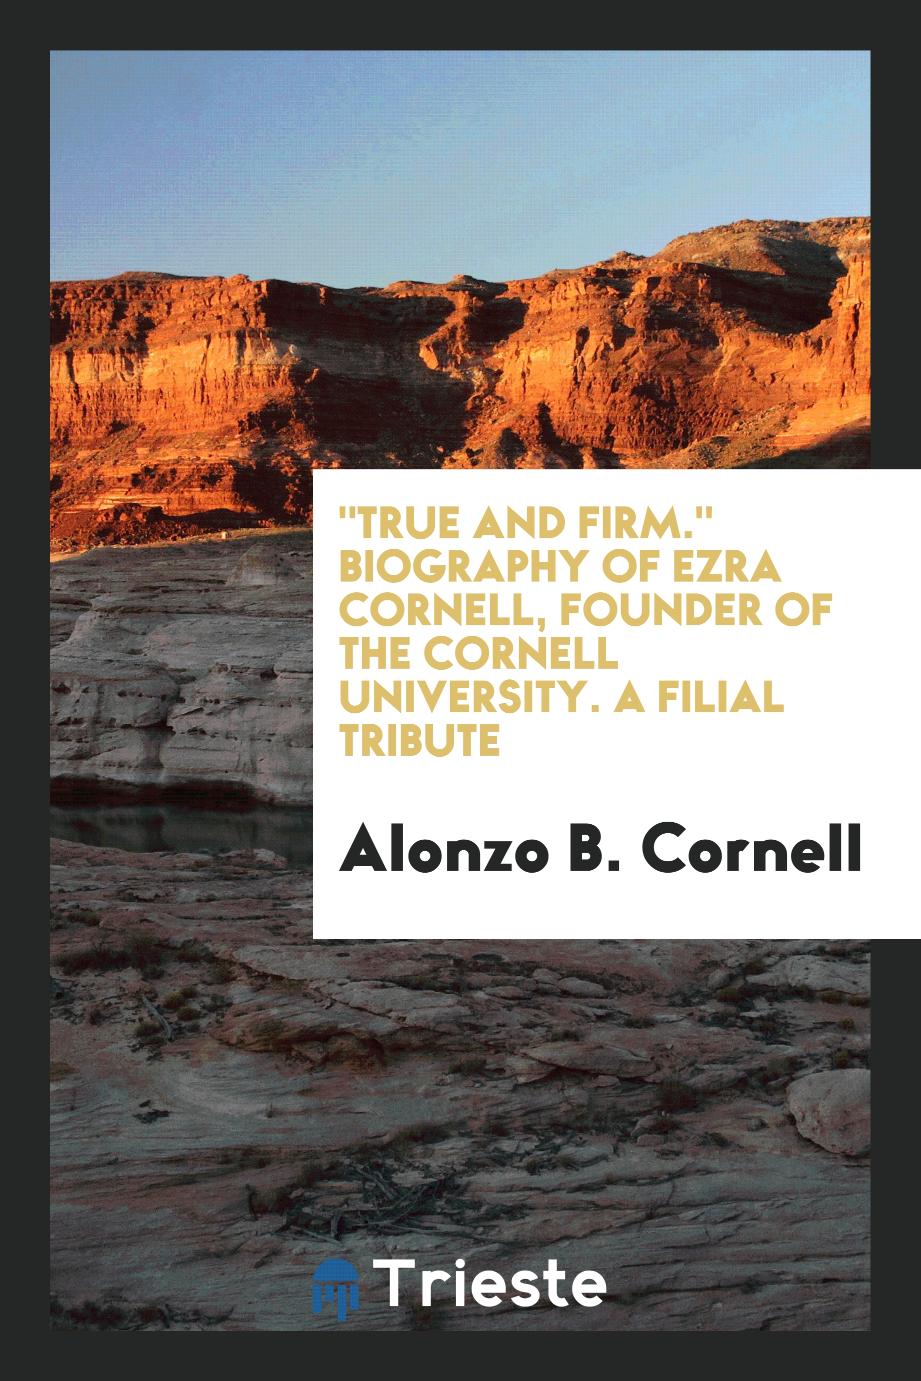 "True and Firm." Biography of Ezra Cornell, Founder of the Cornell University. A Filial Tribute